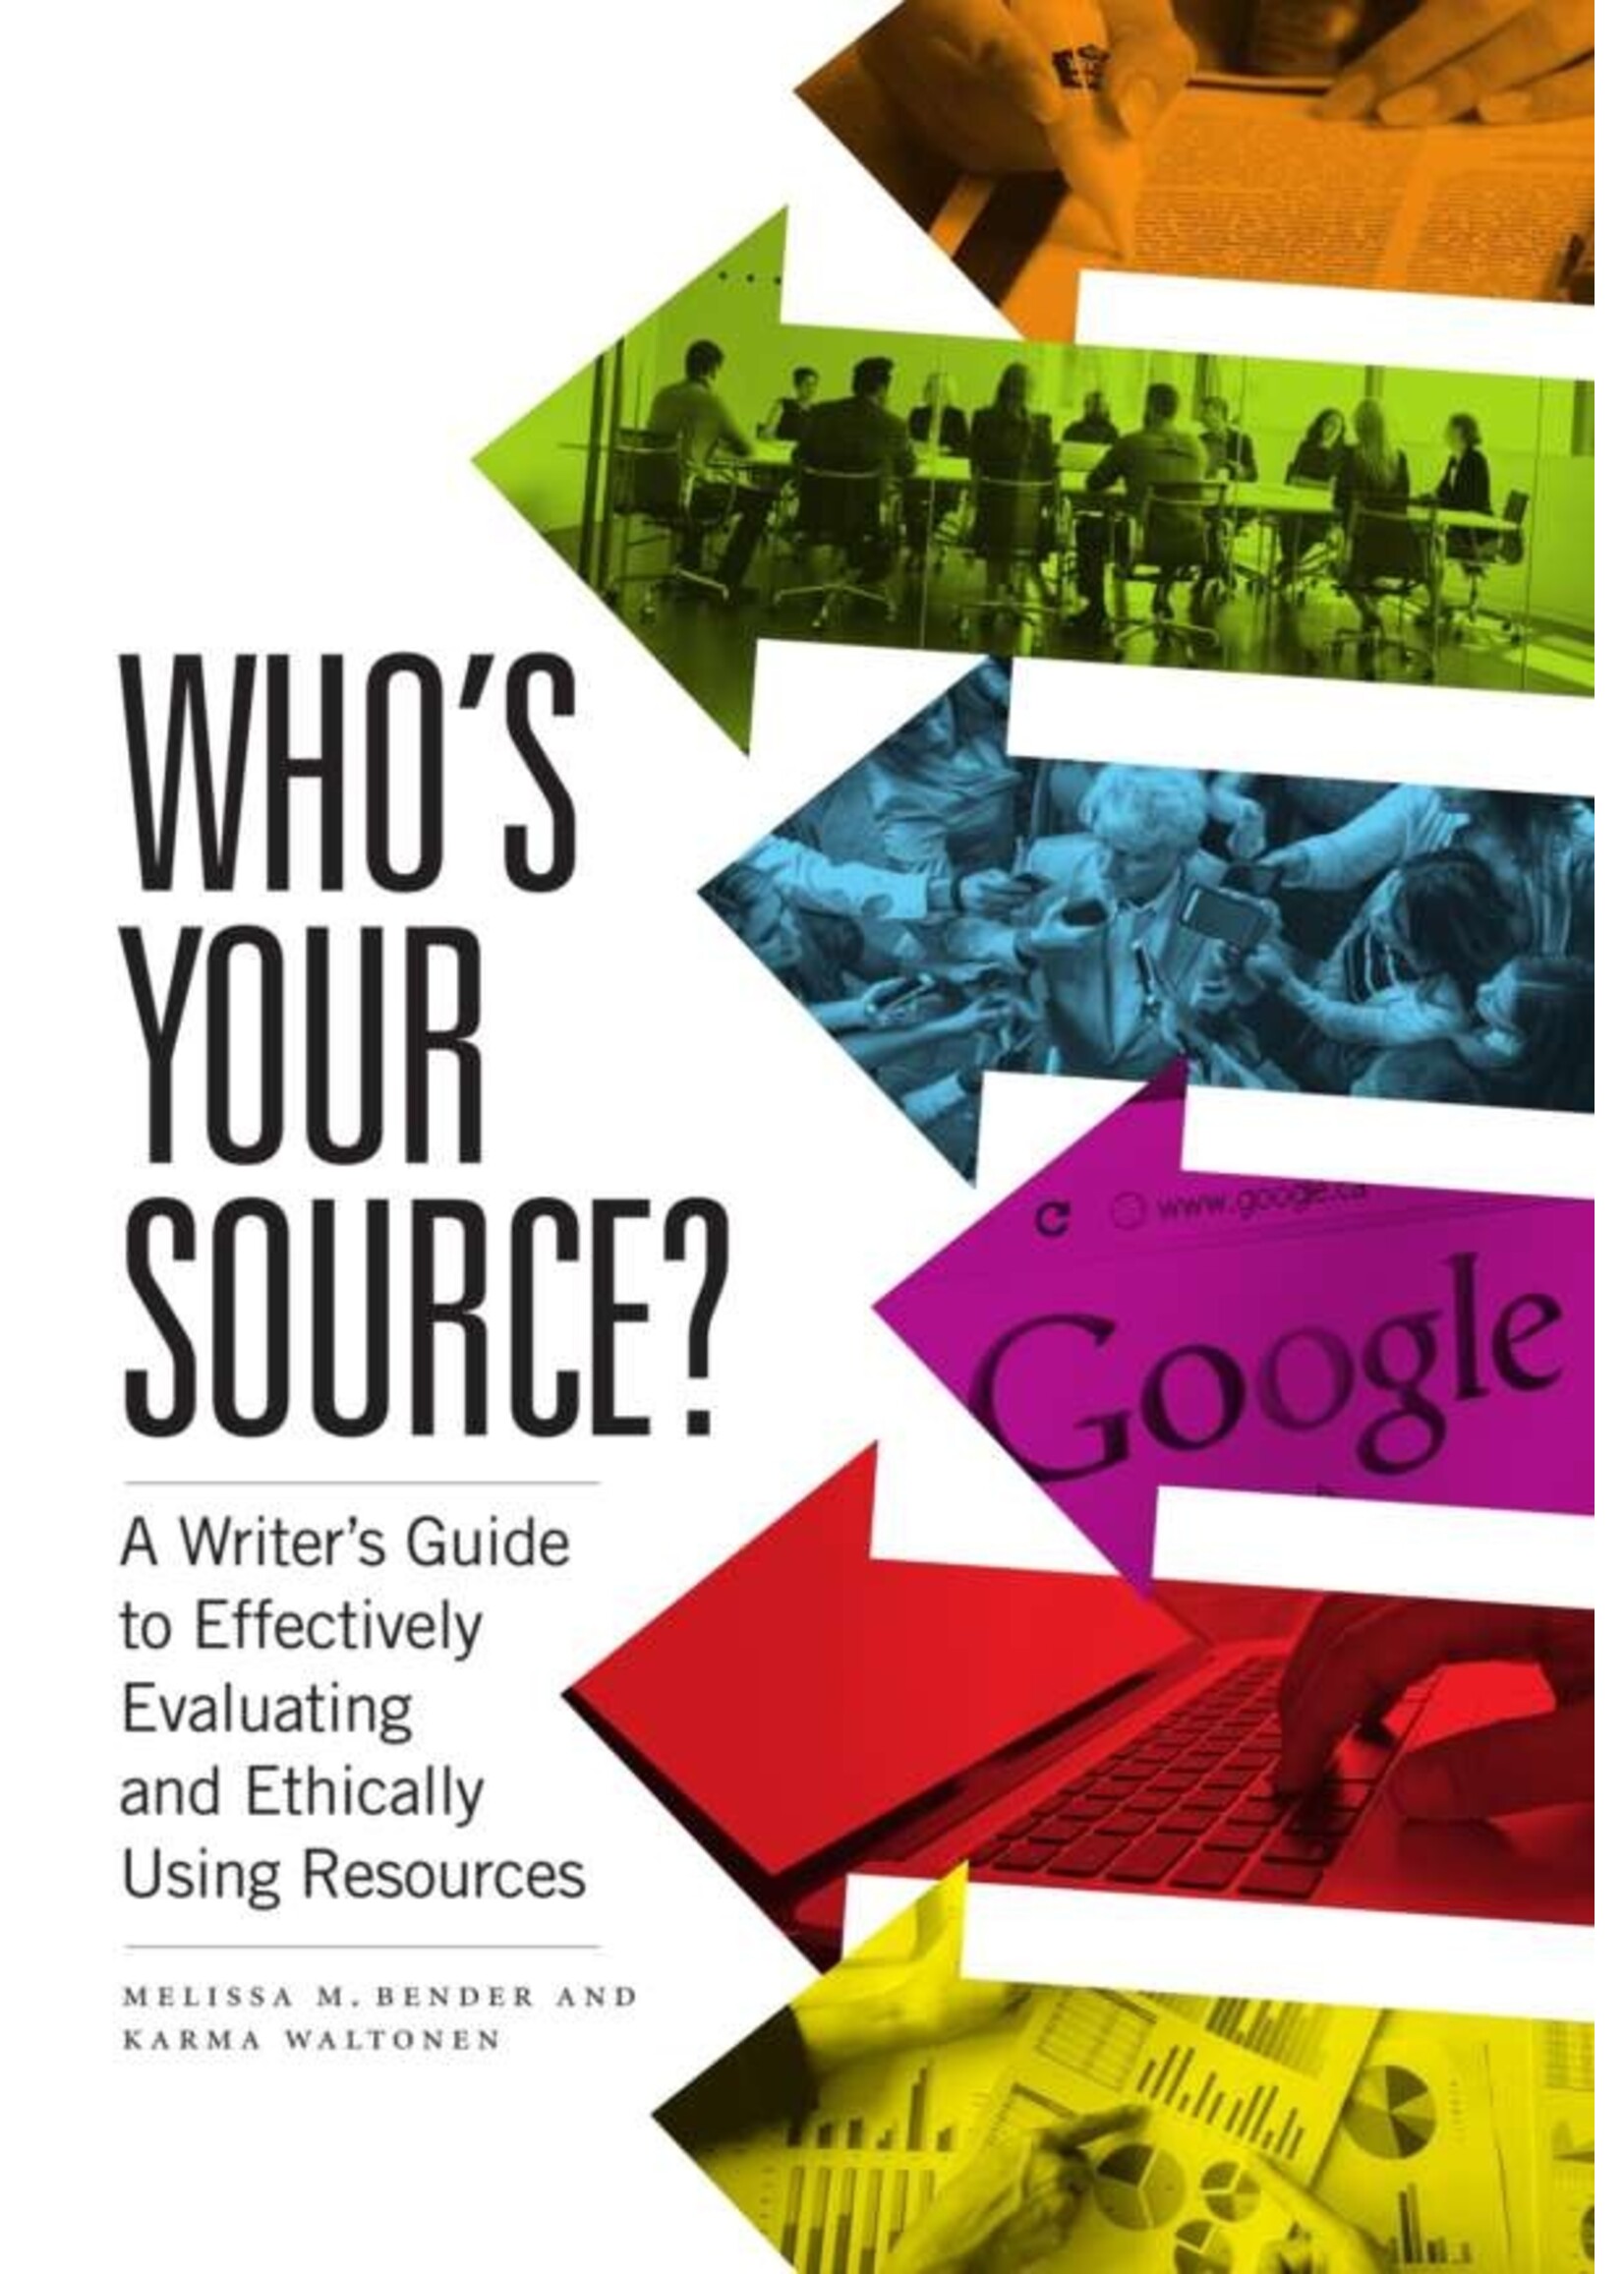 Who’s Your Source?: A Writer’s Guide to Effectively Evaluating and Ethically Using Resources by Melissa M. Bender, Karma Waltonen